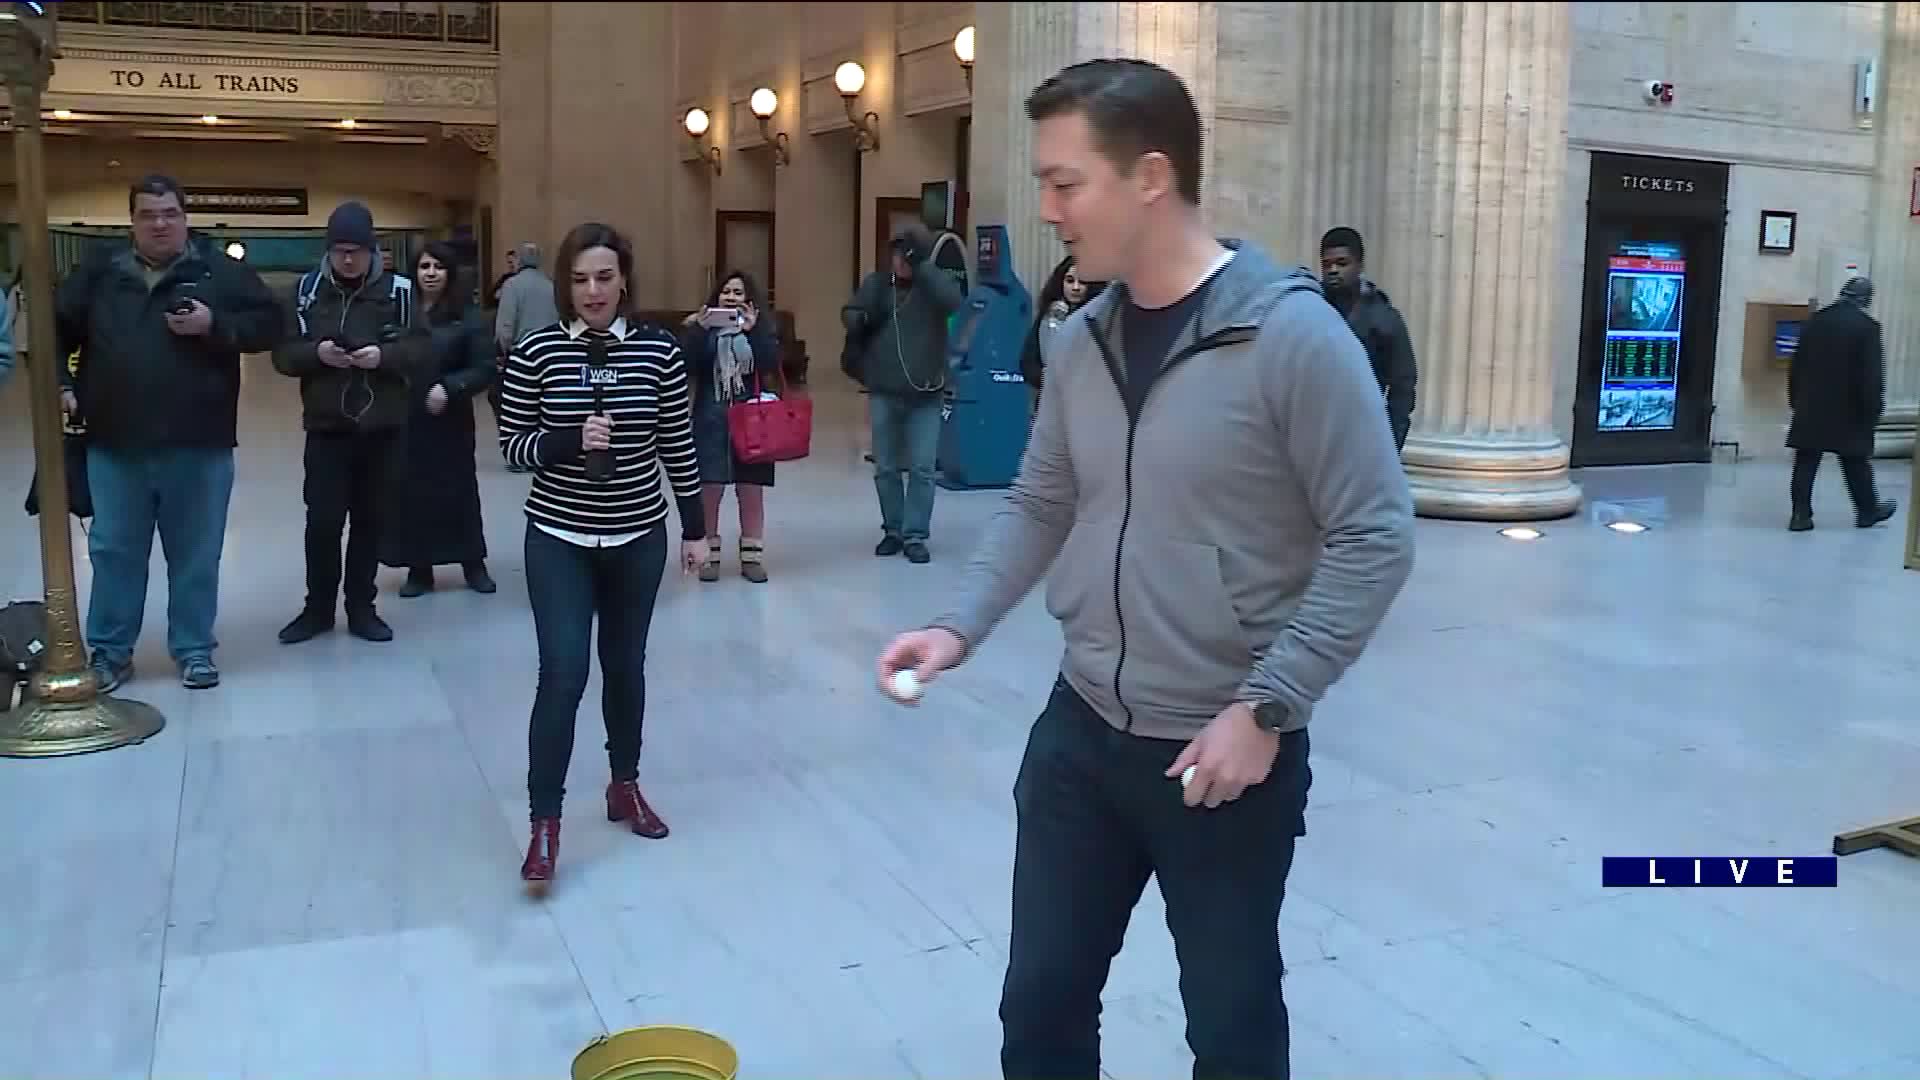 Around Town plays the Grand Prize Game at Union Station